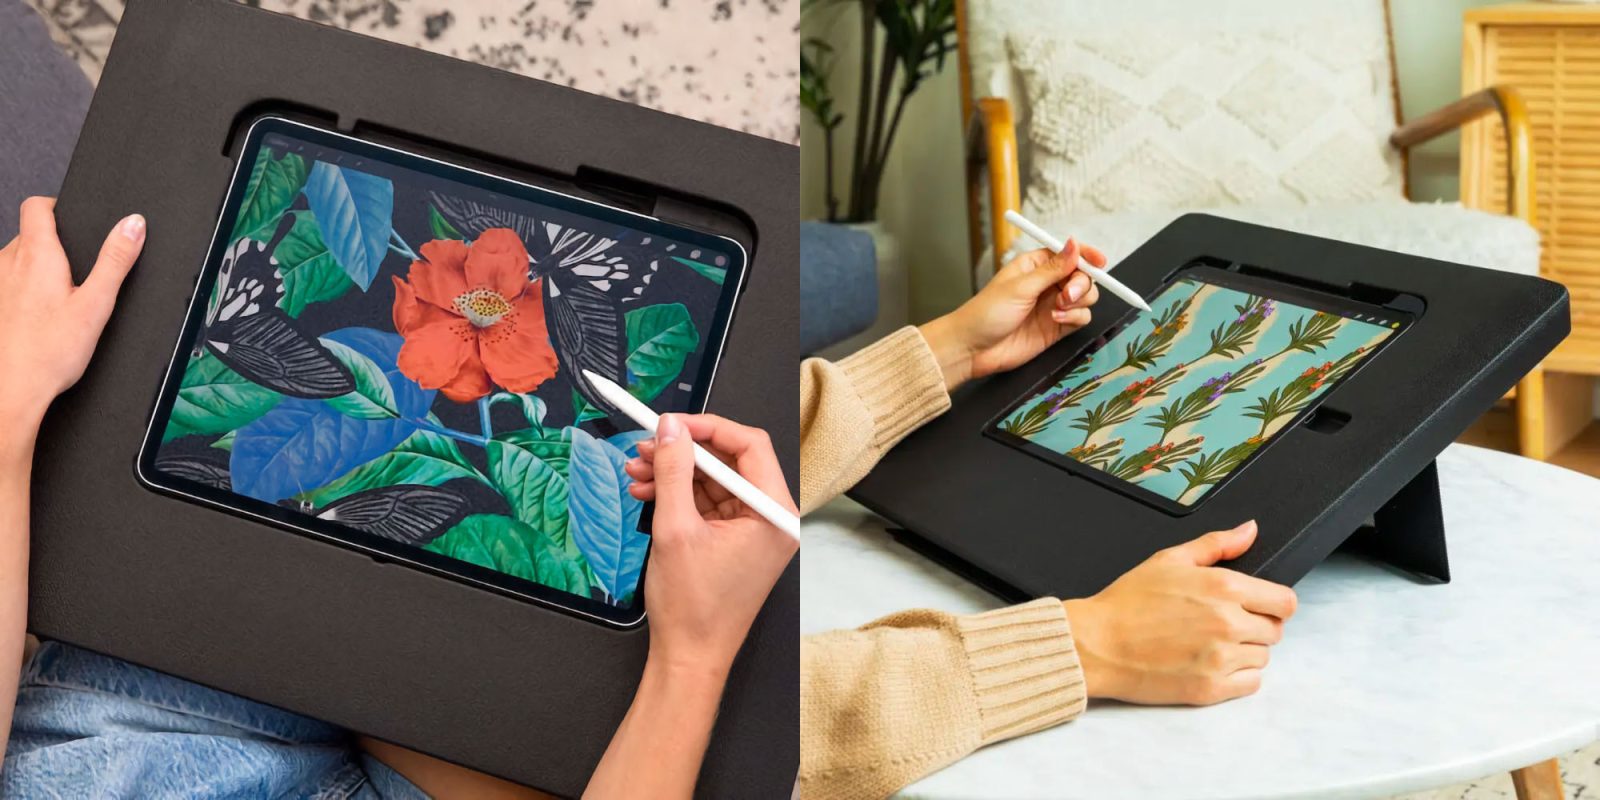 Astropad Darkboard for iPad upgraded with handy foldable stand